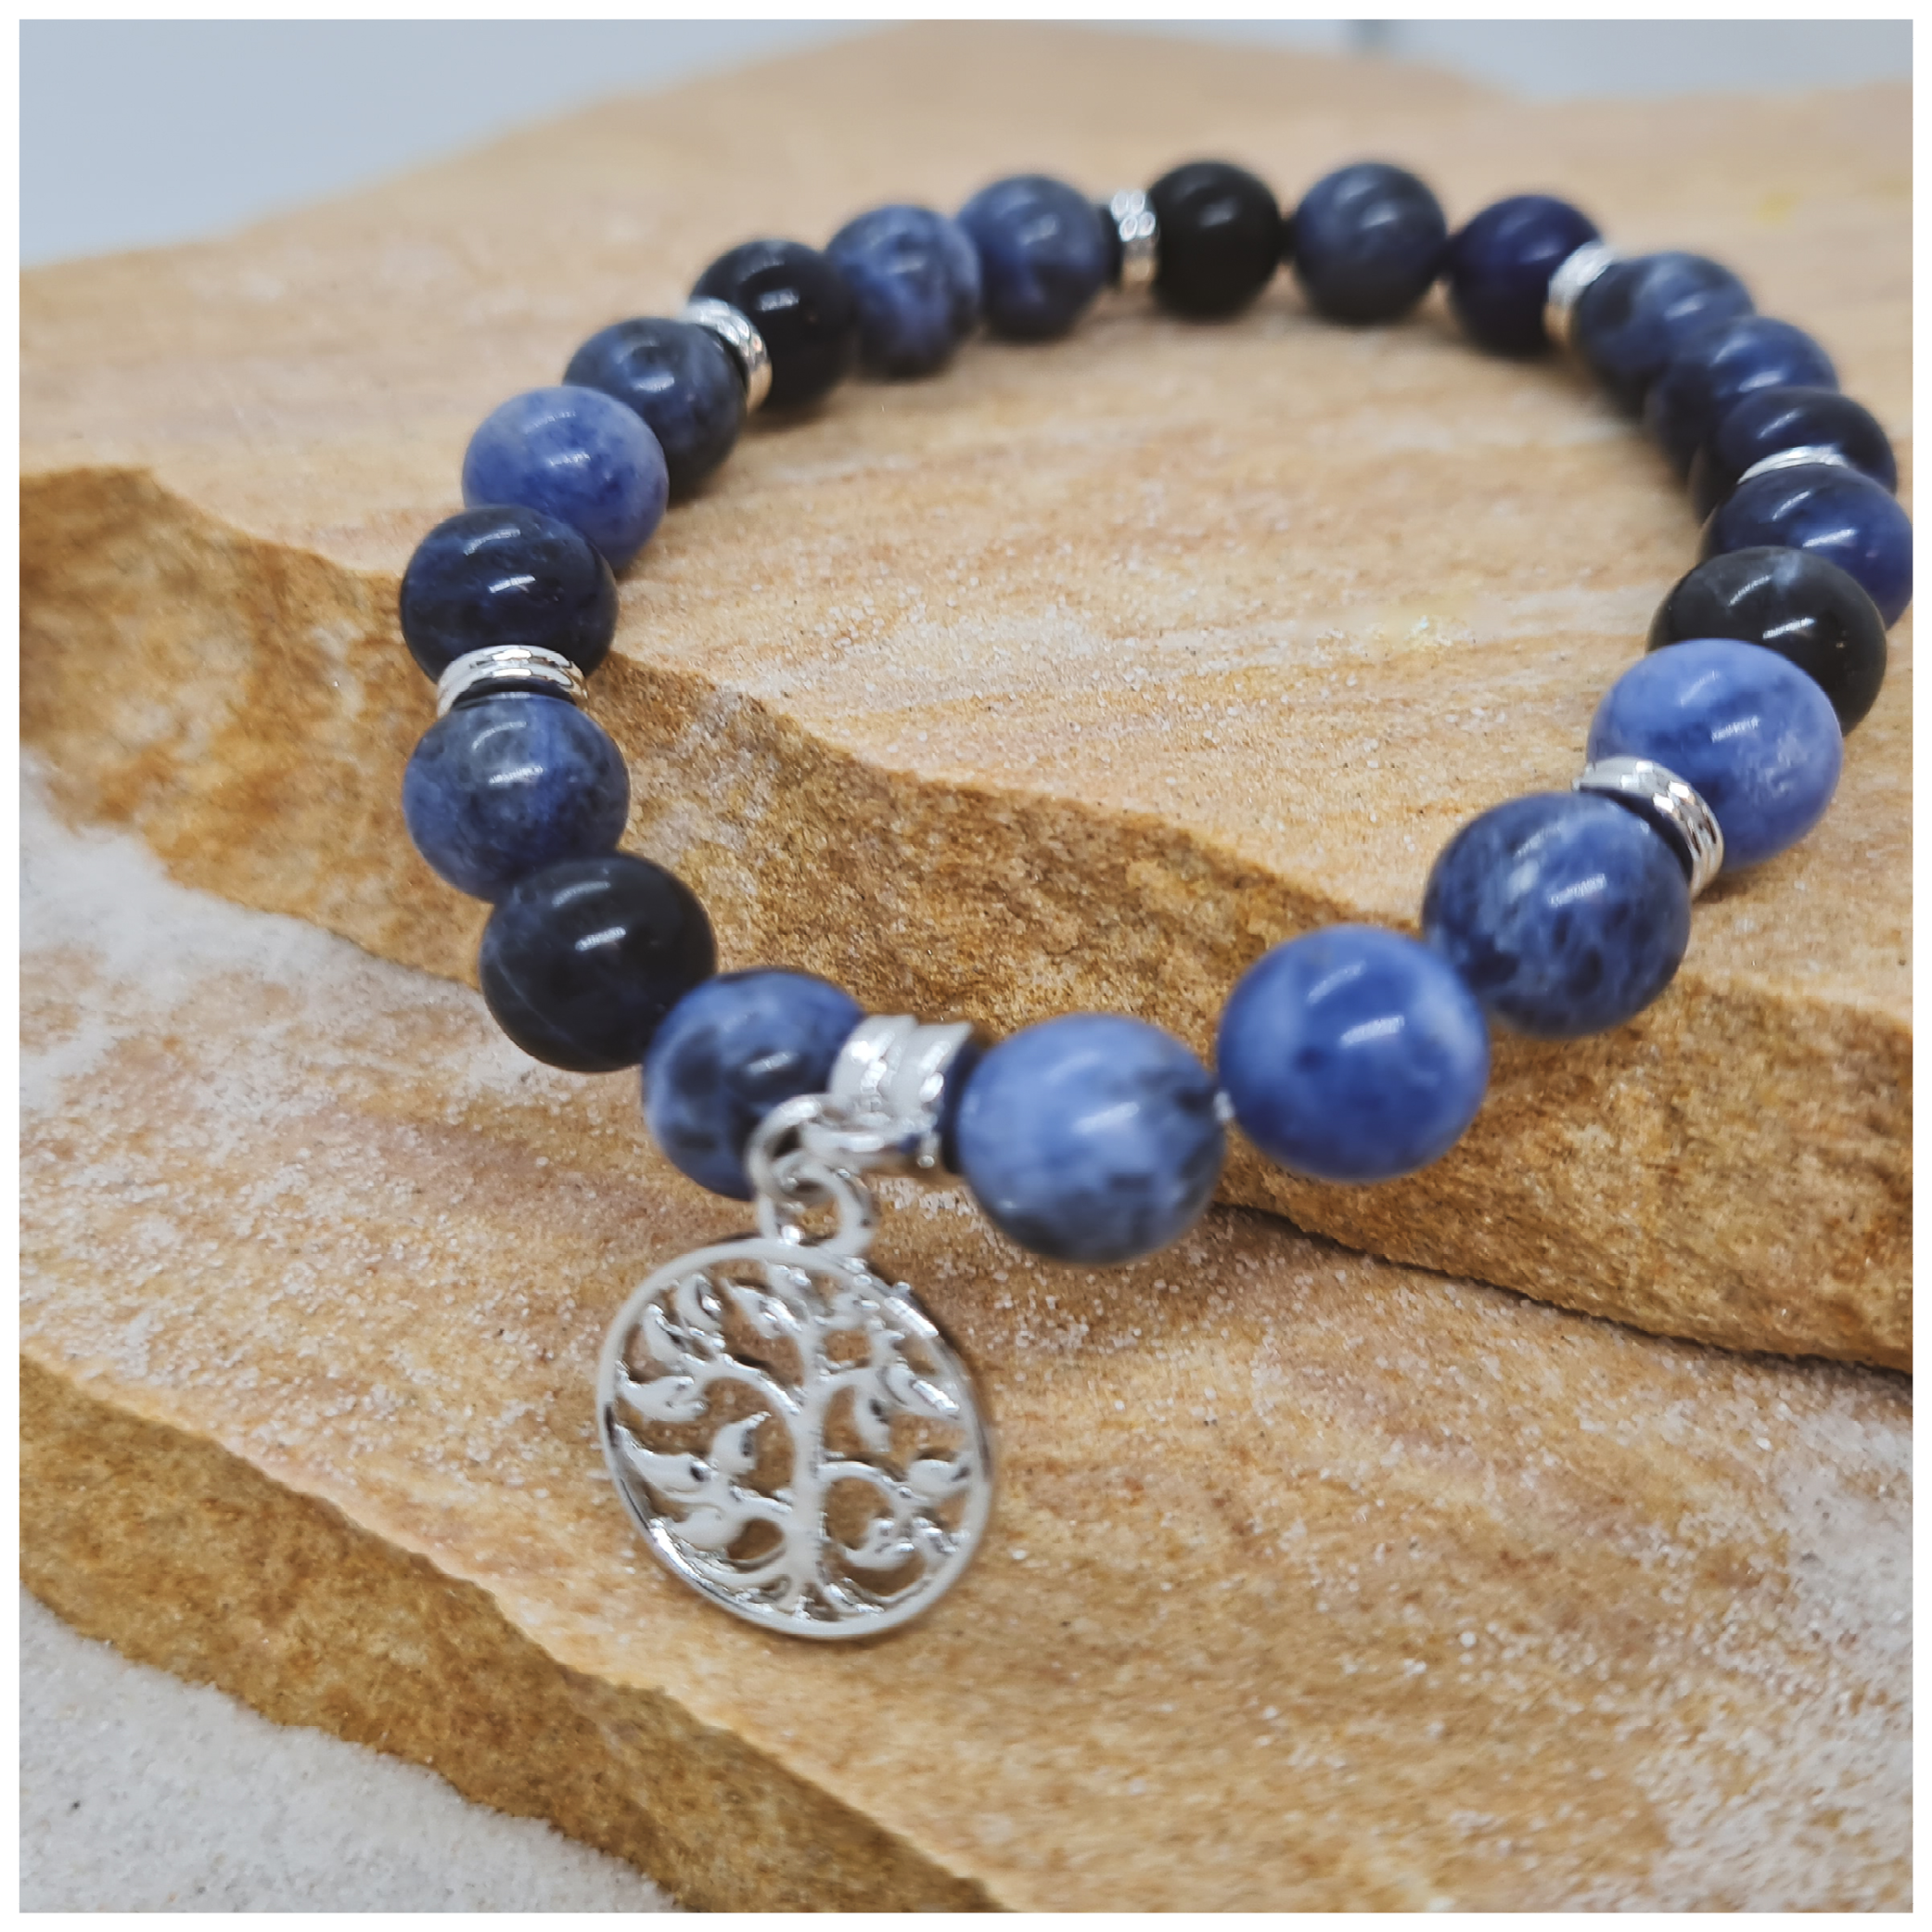 Sodalite 8mm crystal bead bracelet with silver tree of life charm